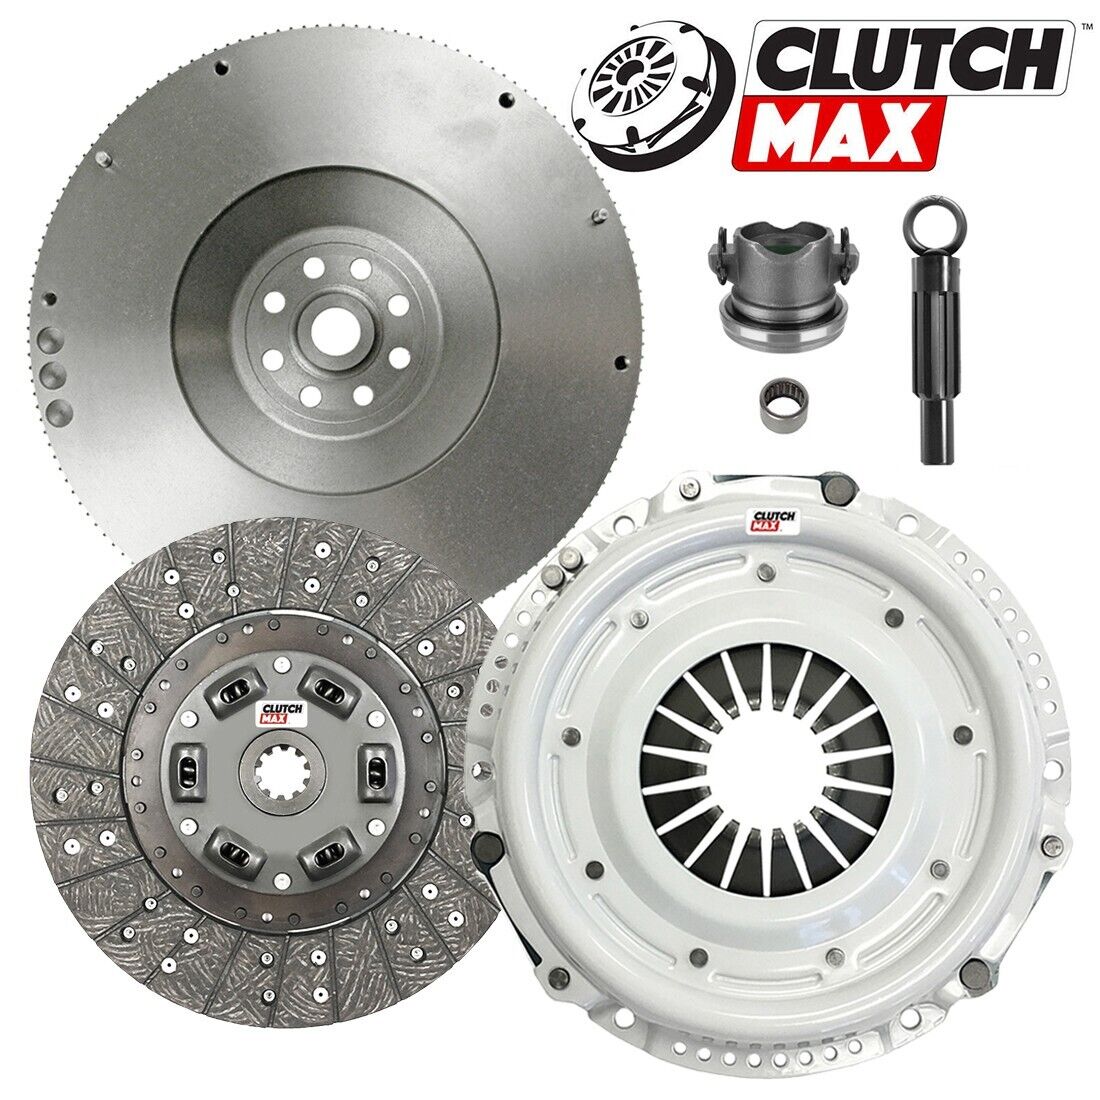 STAGE 1 CLUTCH KIT & FLYWHEEL for 2007-2011 JEEP WRANGLER RUBICON UNLIMITED 3.8L